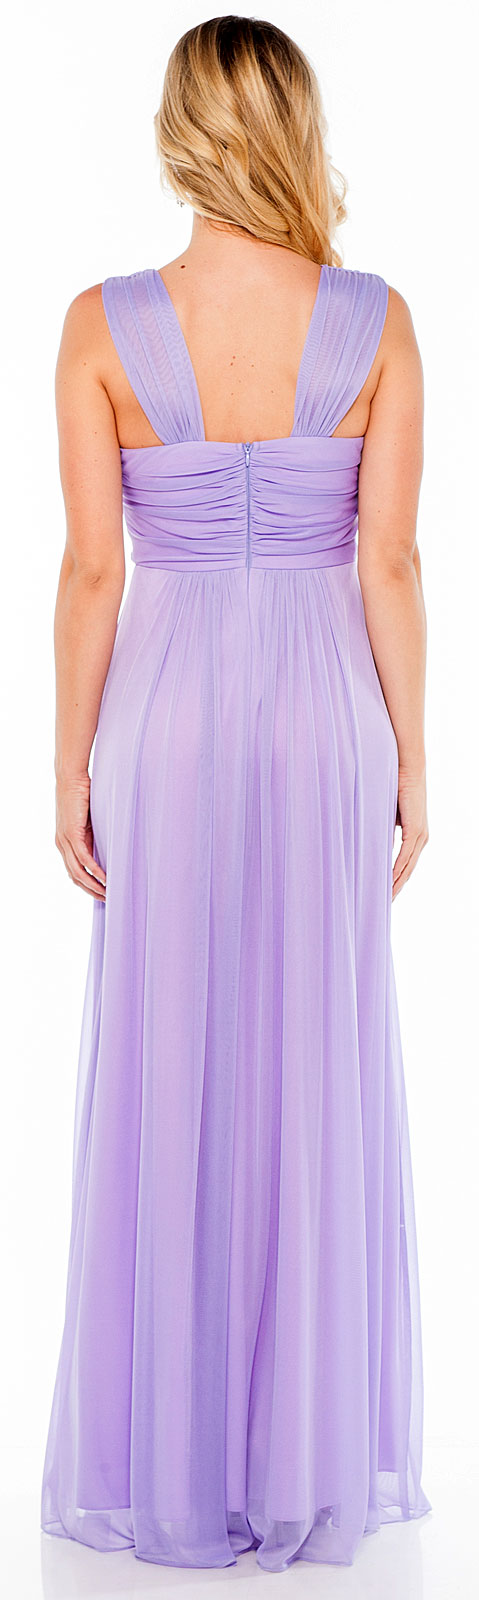 Image of Braid Accent Ruched Long Formal Bridesmaid Dress  back in Lilac